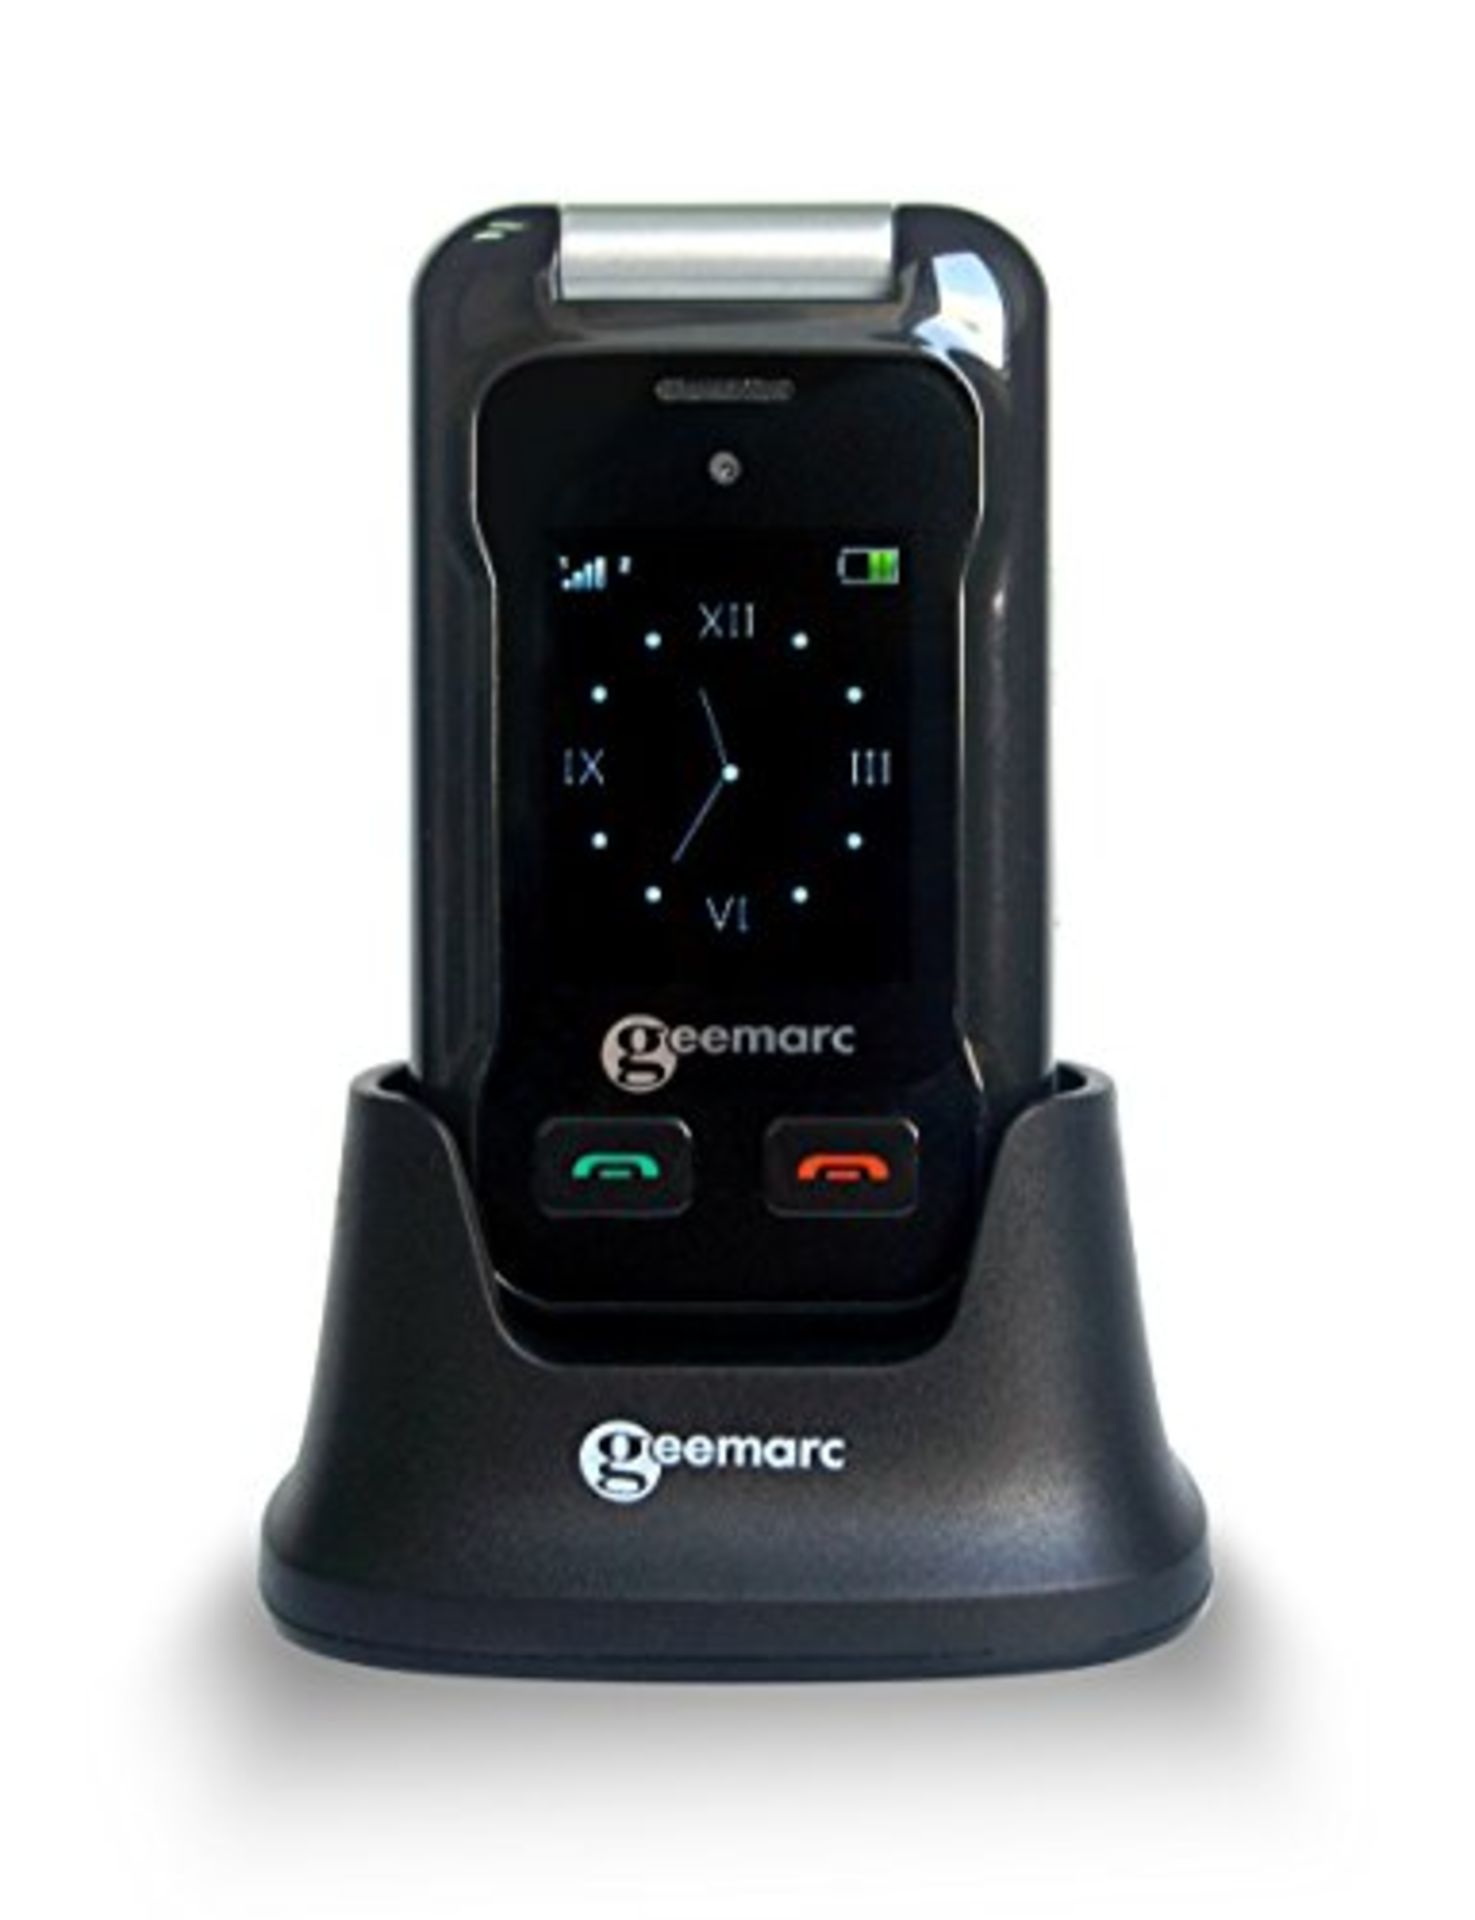 RRP £69.00 Geemarc CL8500 - Amplified Big Button Clamshell SIM-Free Mobile Phone with Dual LCD Di